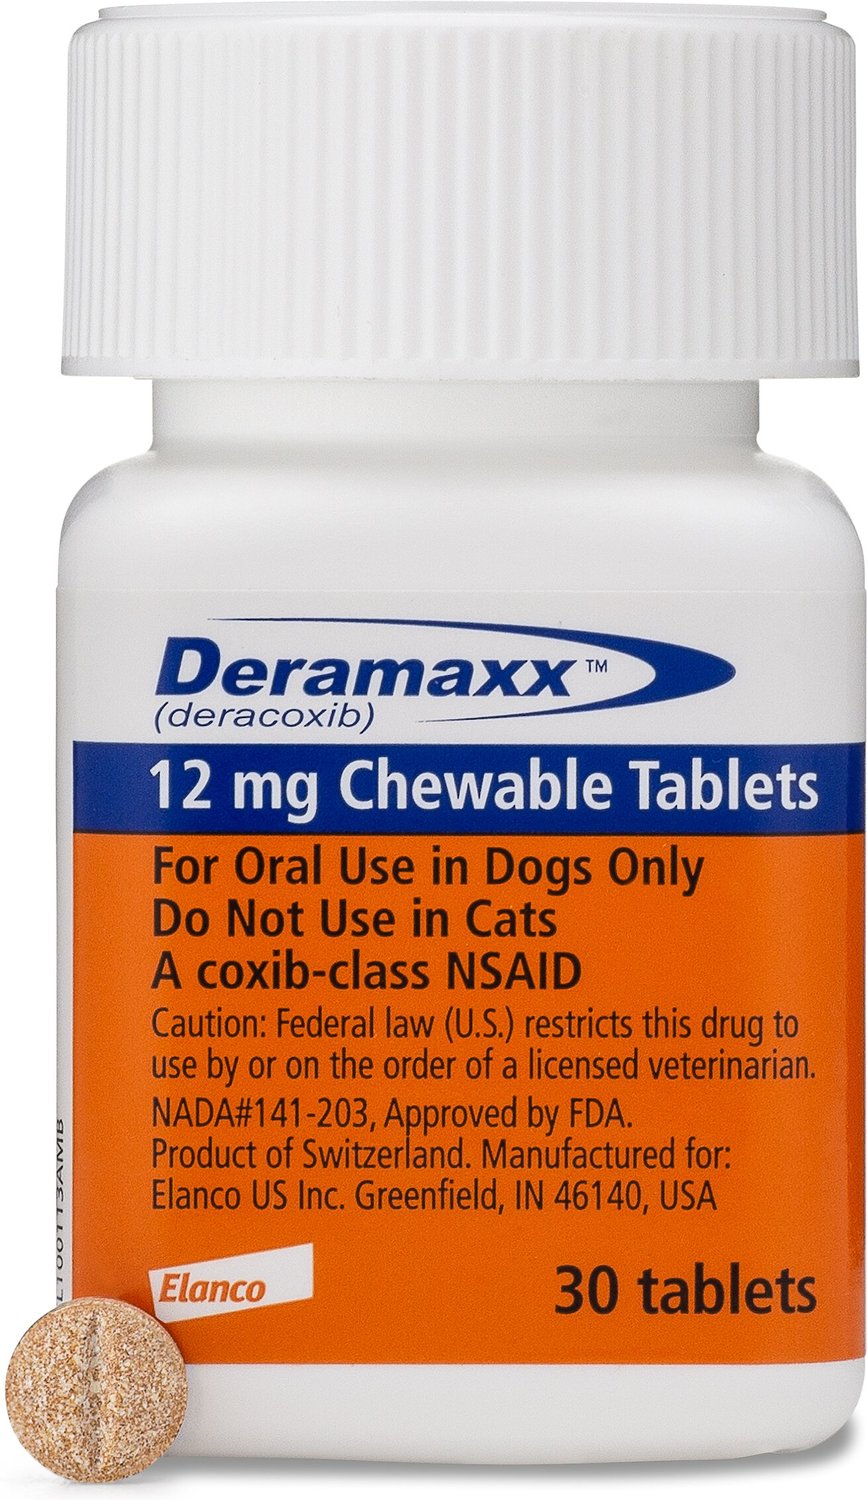 DERAMAXX Chewable Tablets for Dogs, 12 